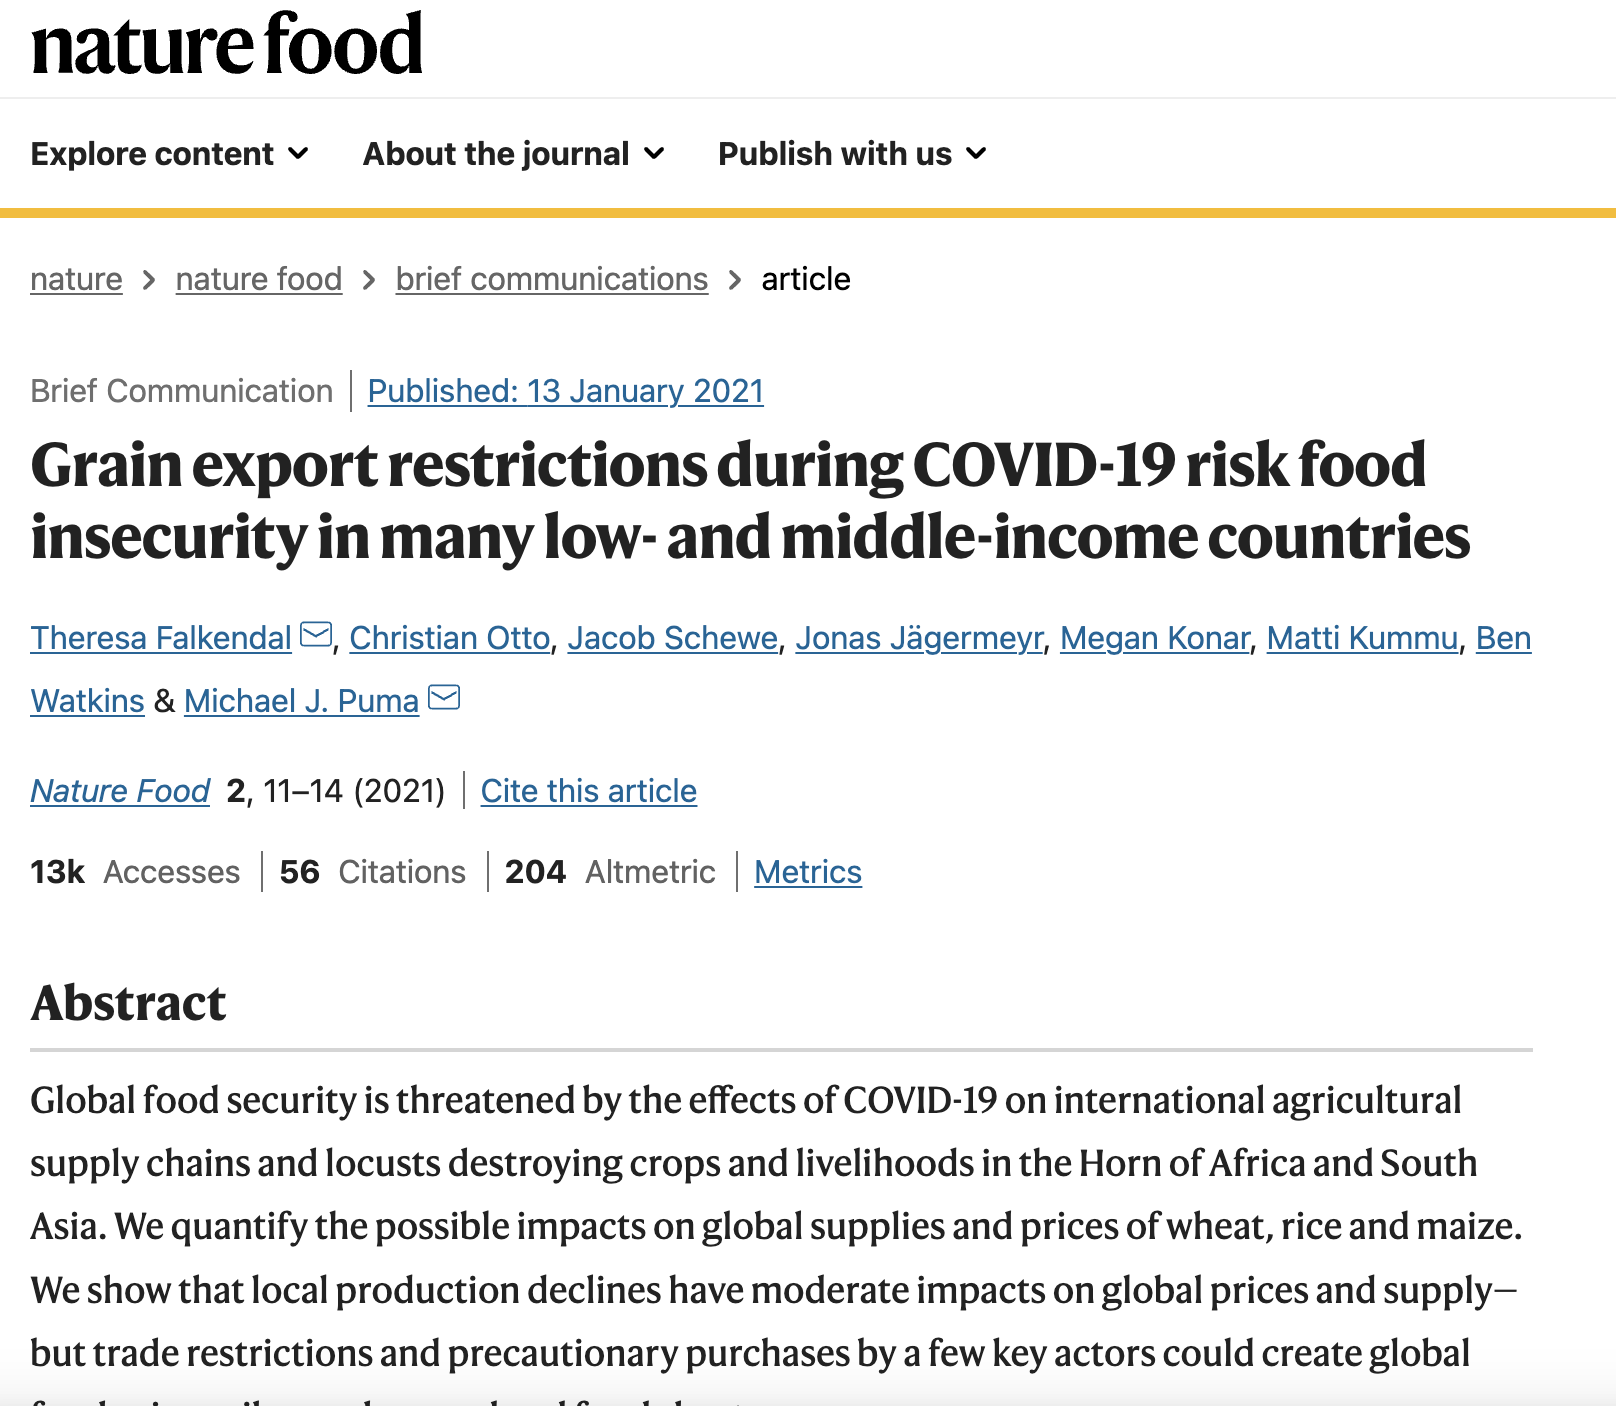 WP5 International cooperation, development and resilience- Grain export restrictions during COVID-19 risk food insecurity in many low- and middle-income countries